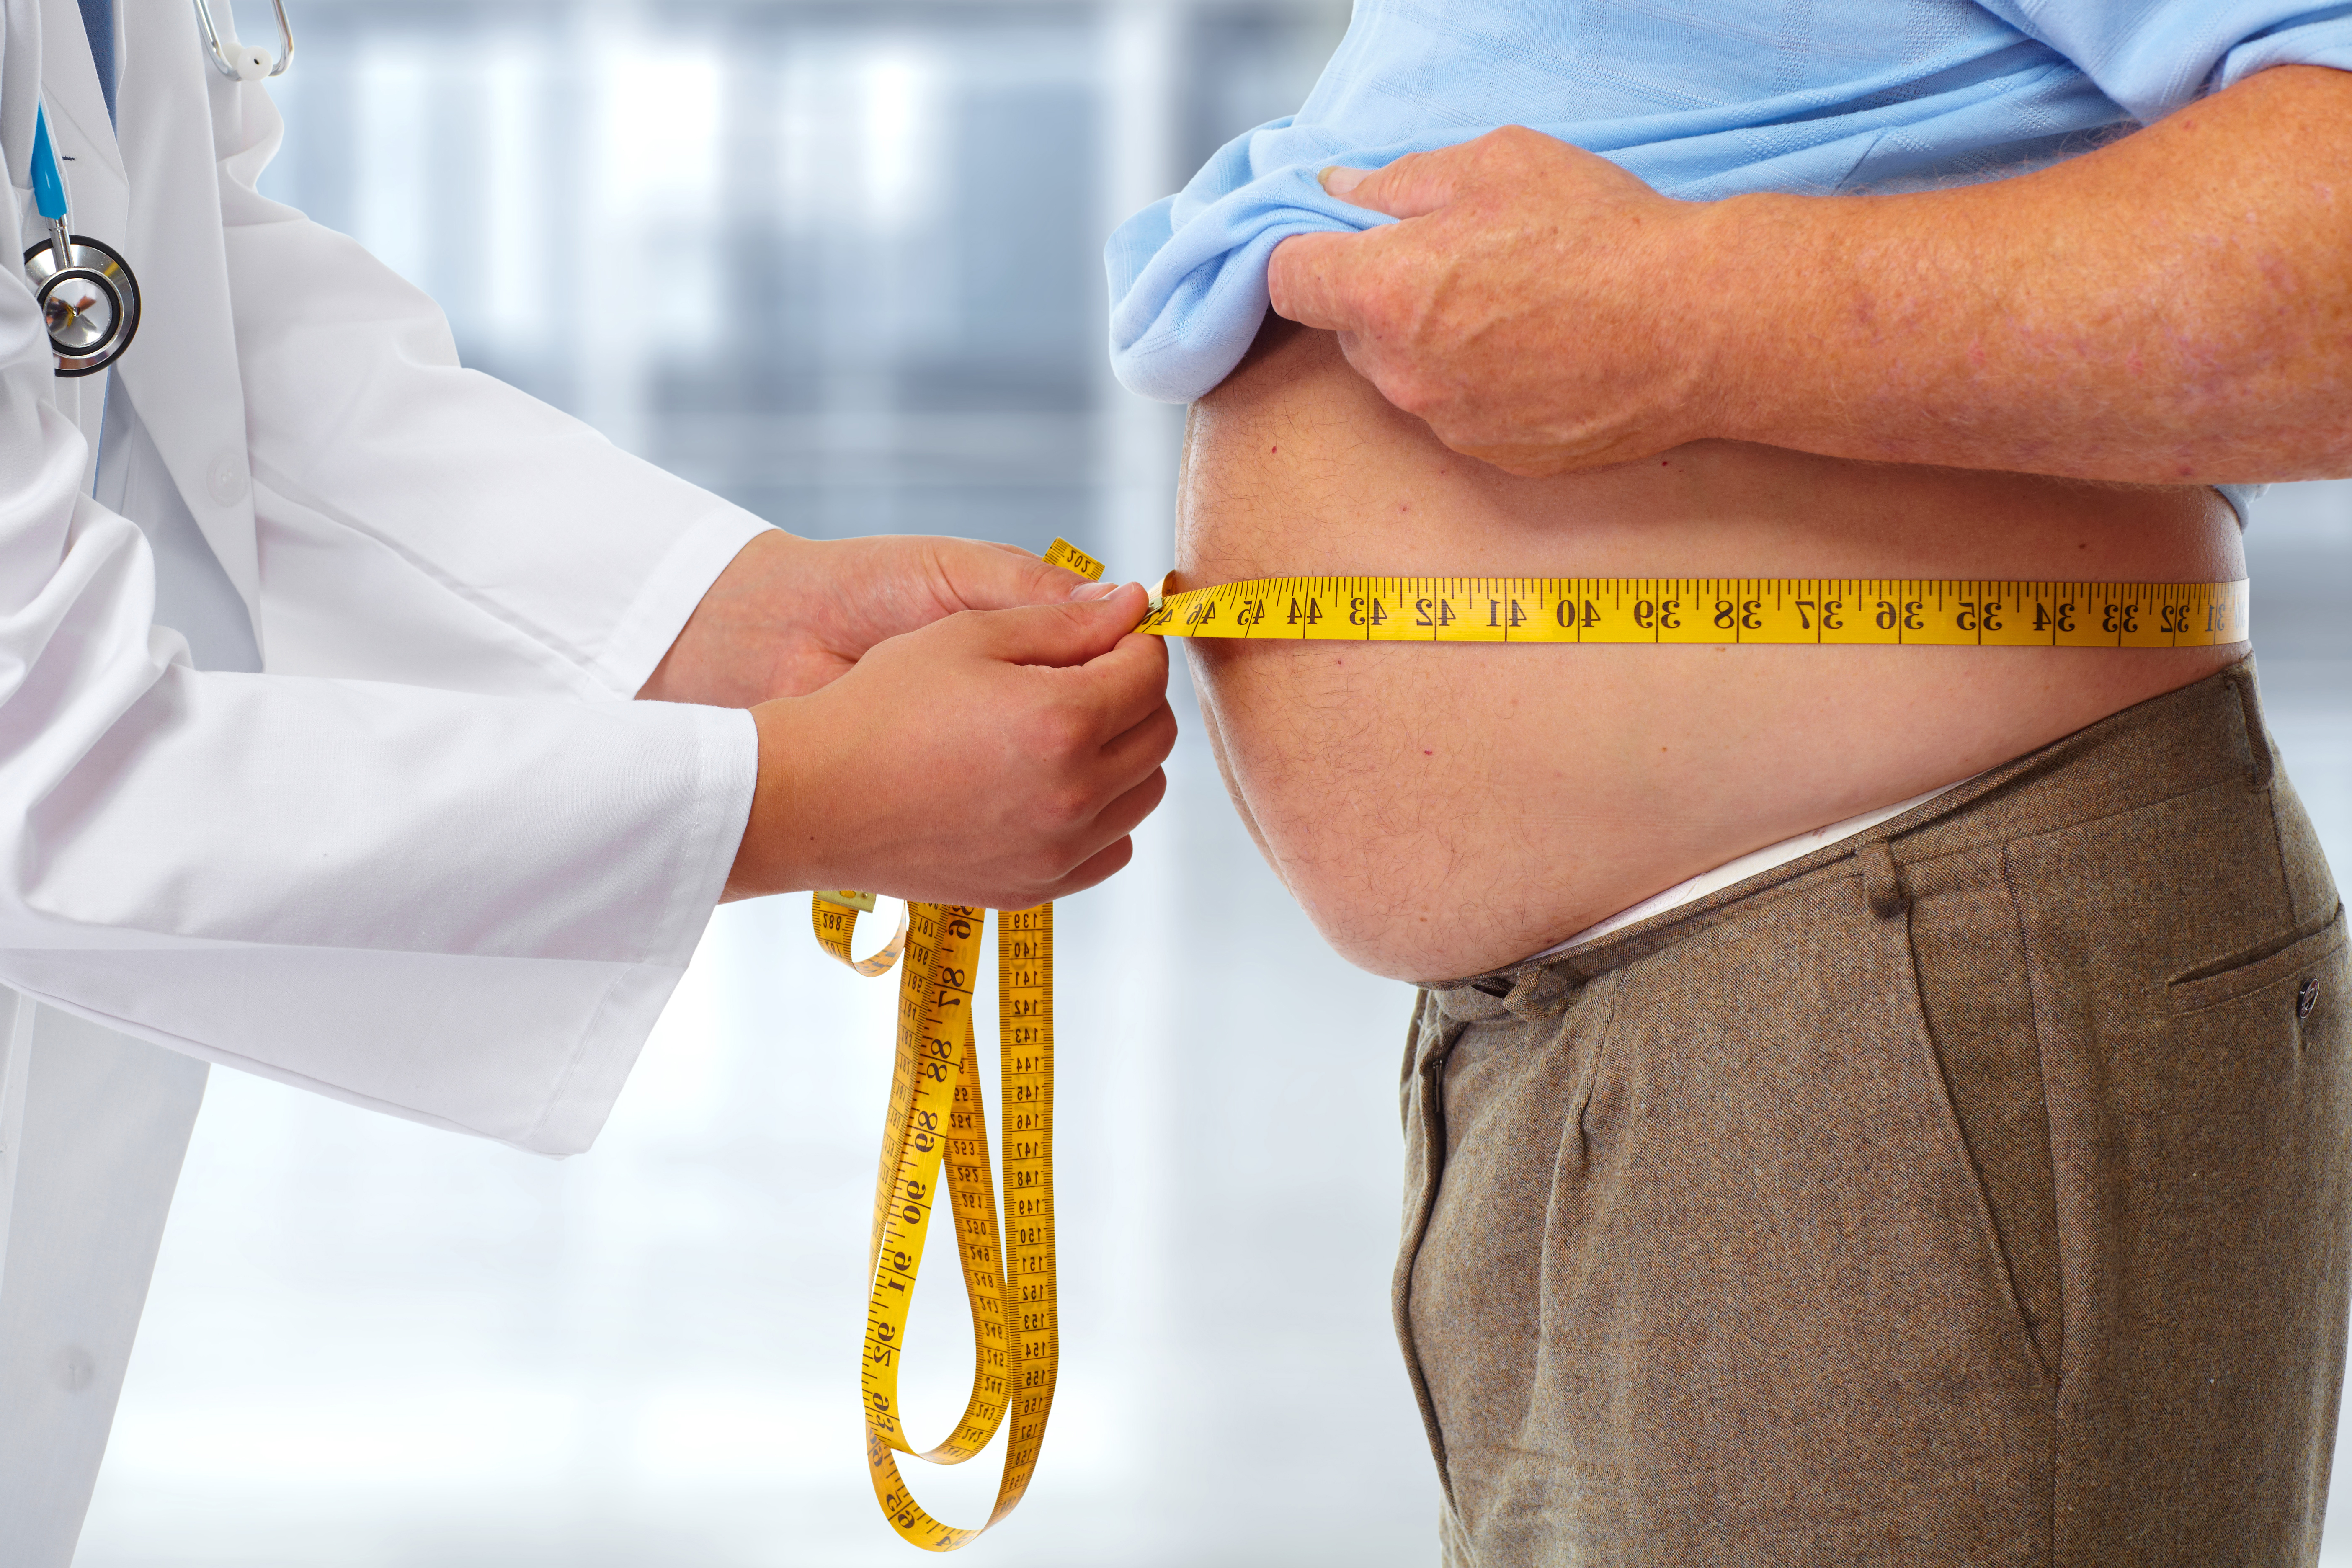 Non-Surgical Weight Loss Procedures